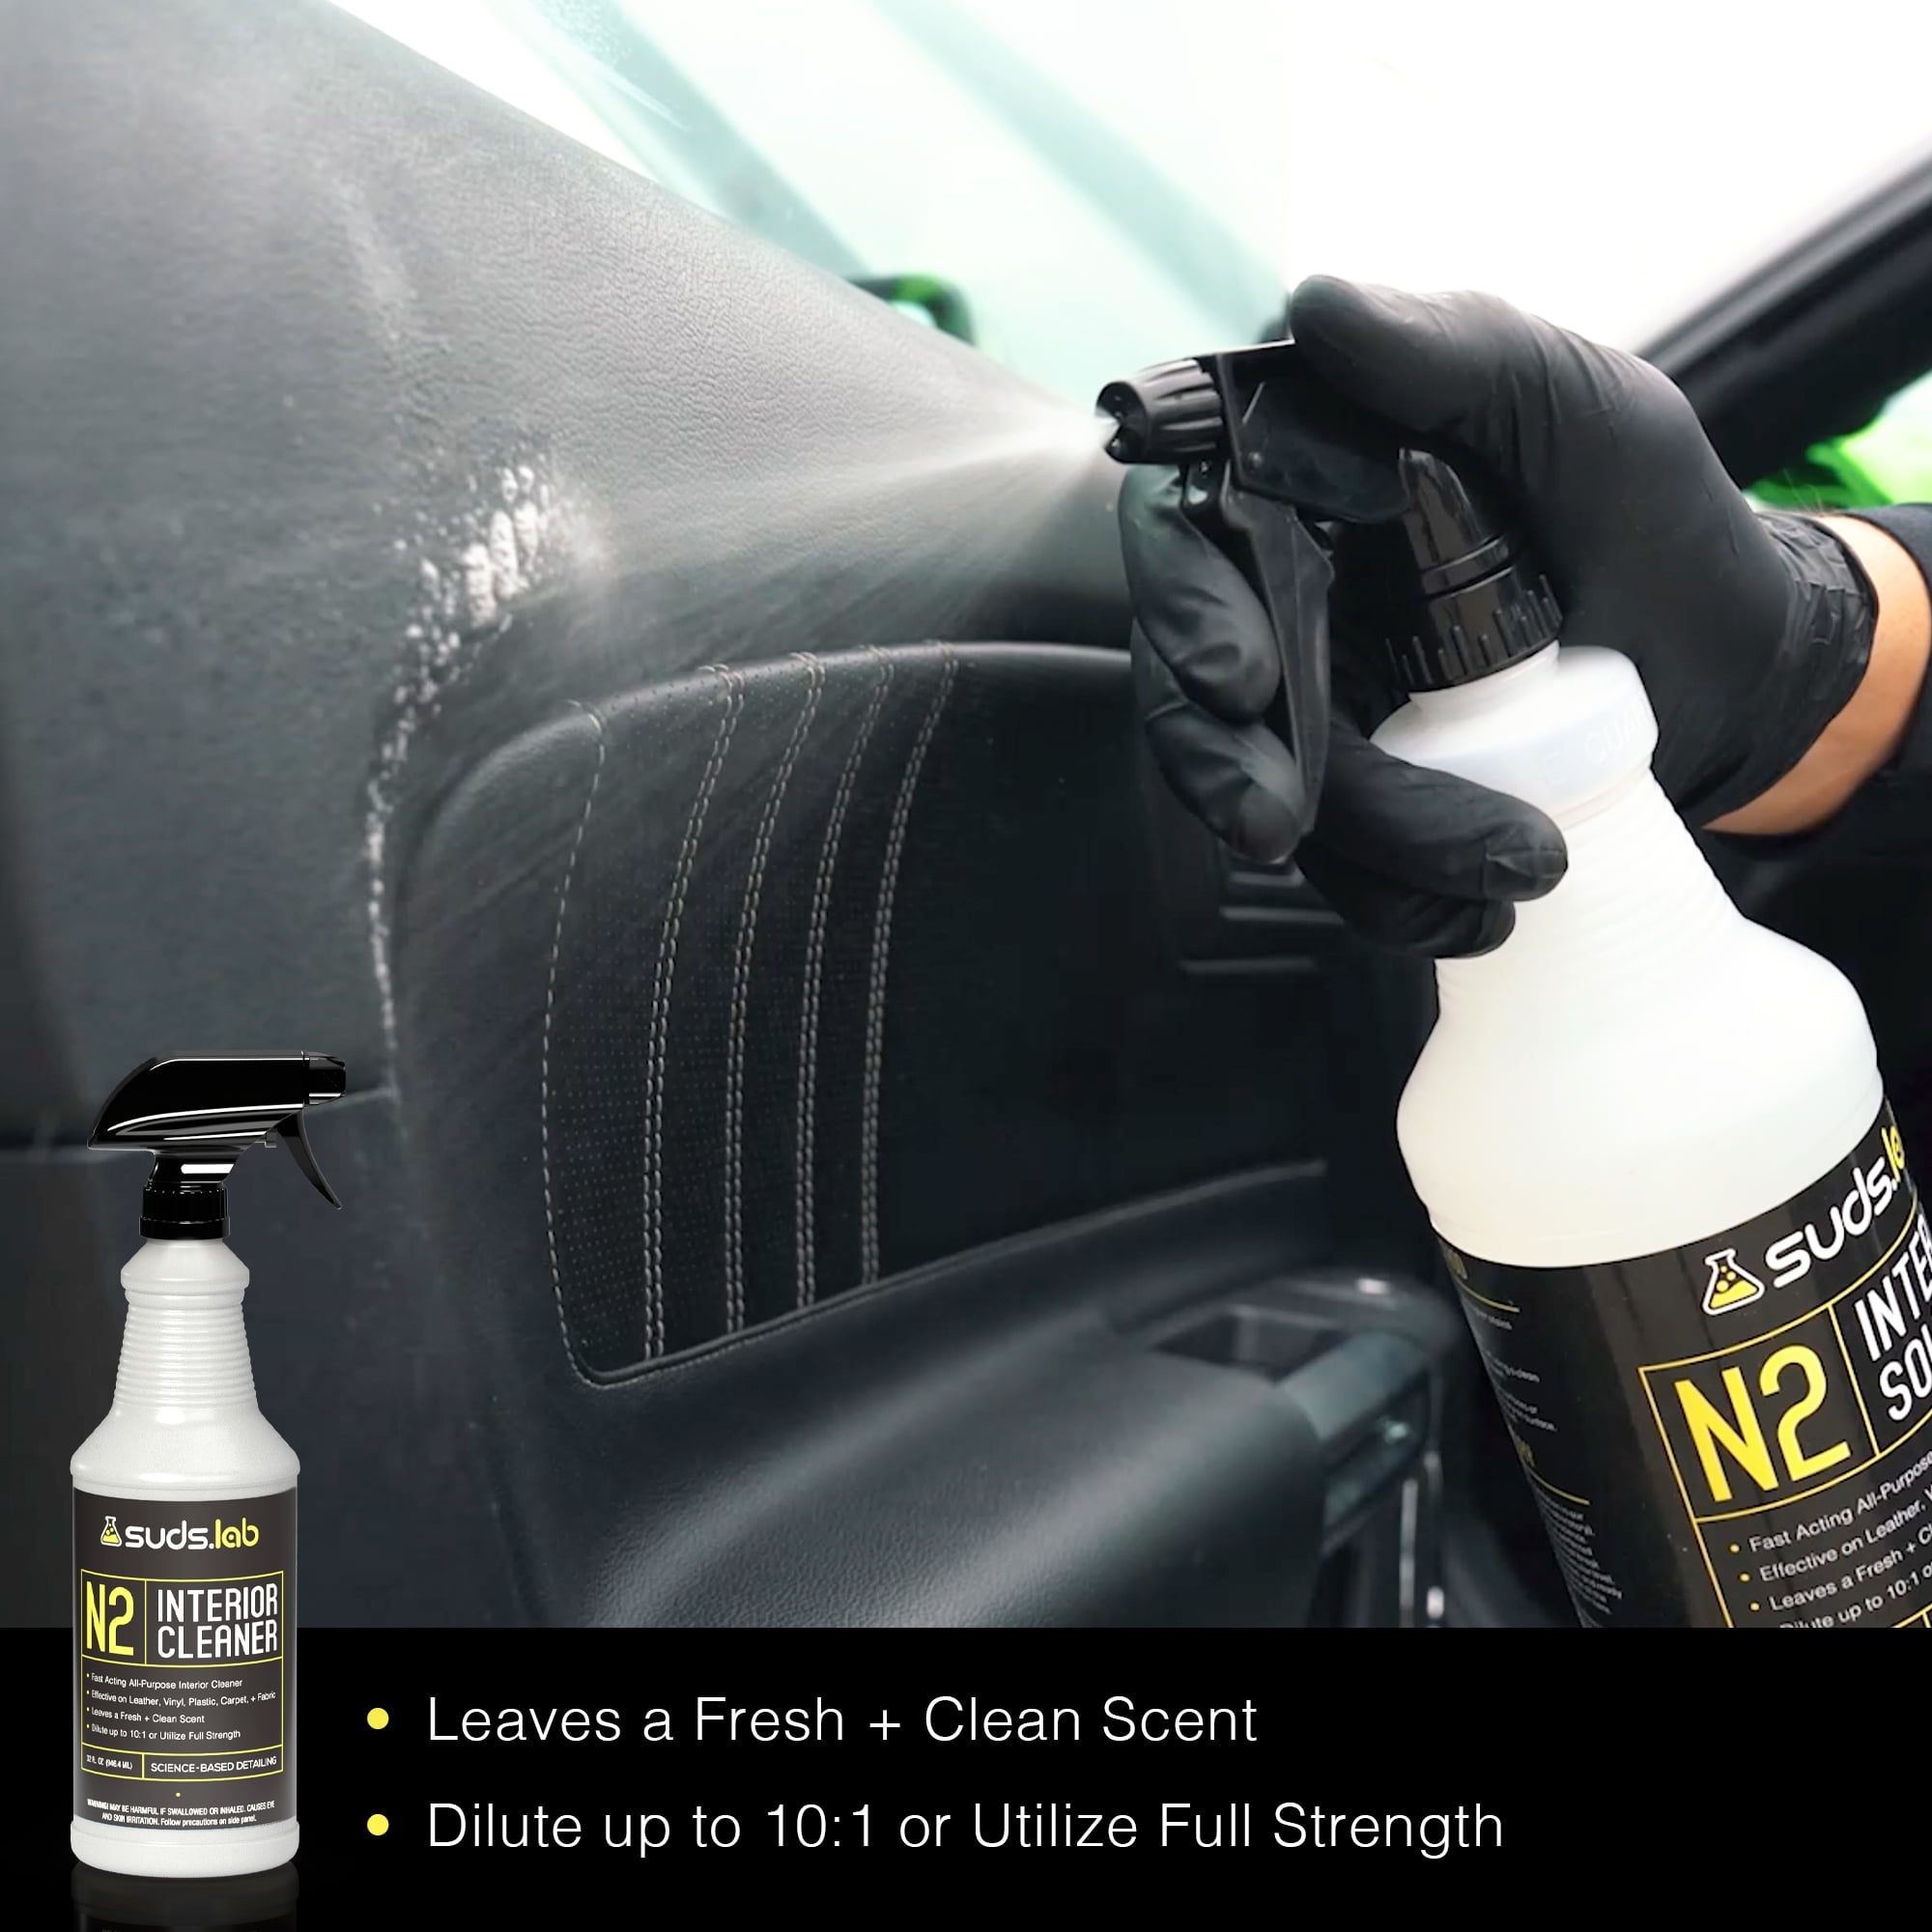  Suds Lab FC Carpet & Fabric Cleaner Interior Upholstery, Car  Detailing for Seat, Cloth, Stains and Removes Odor with Clean Fresh Scent,  32oz. : 汽車